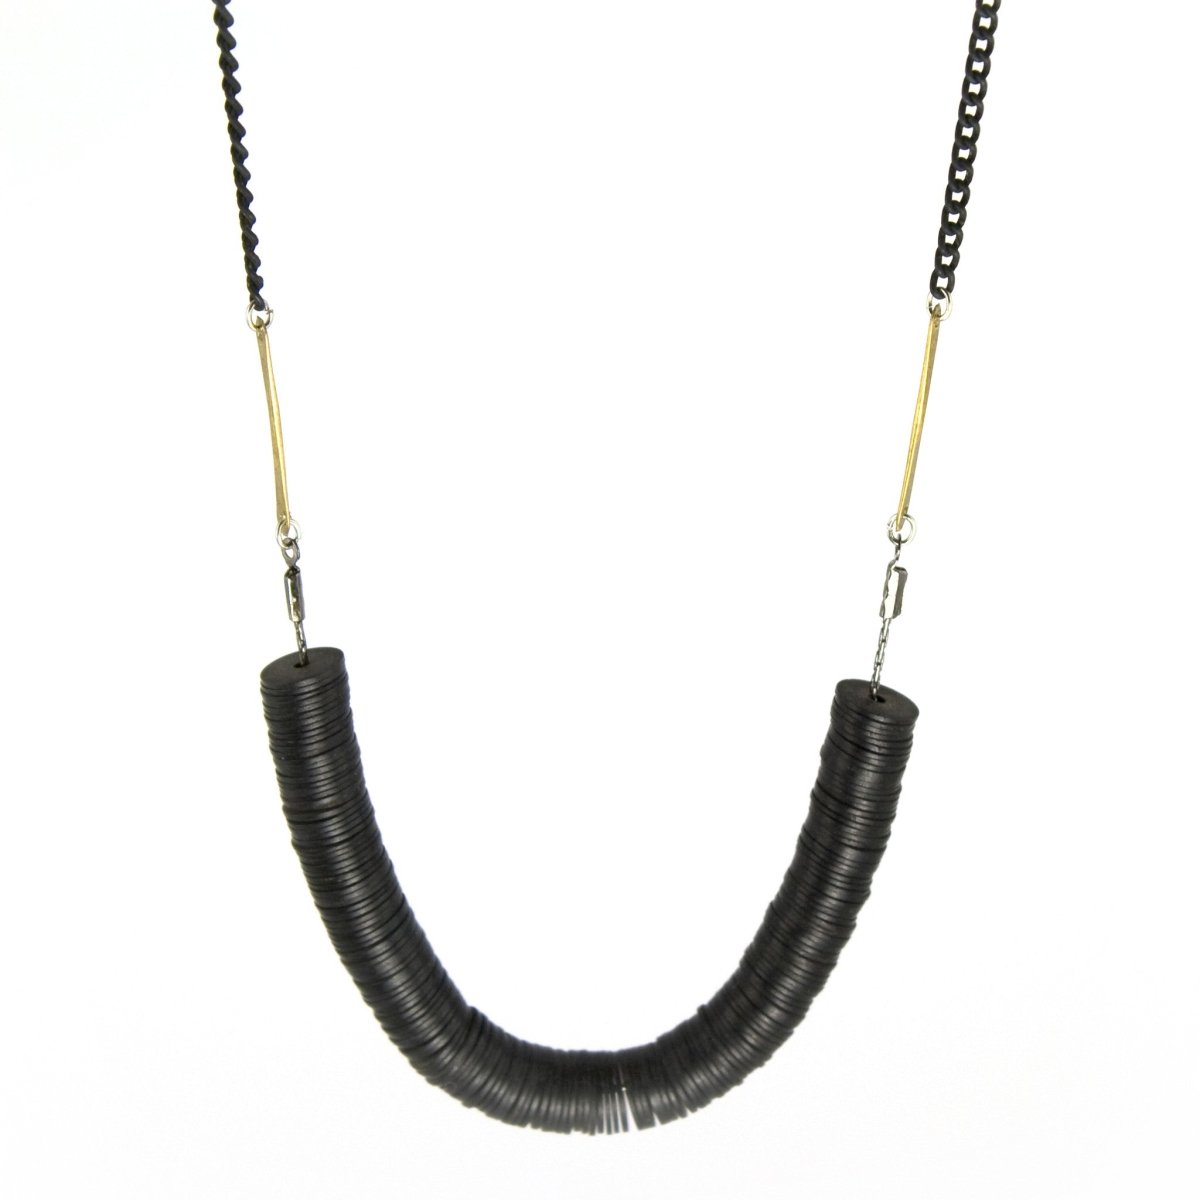 betsy & iya Sirocco necklace with trade beads